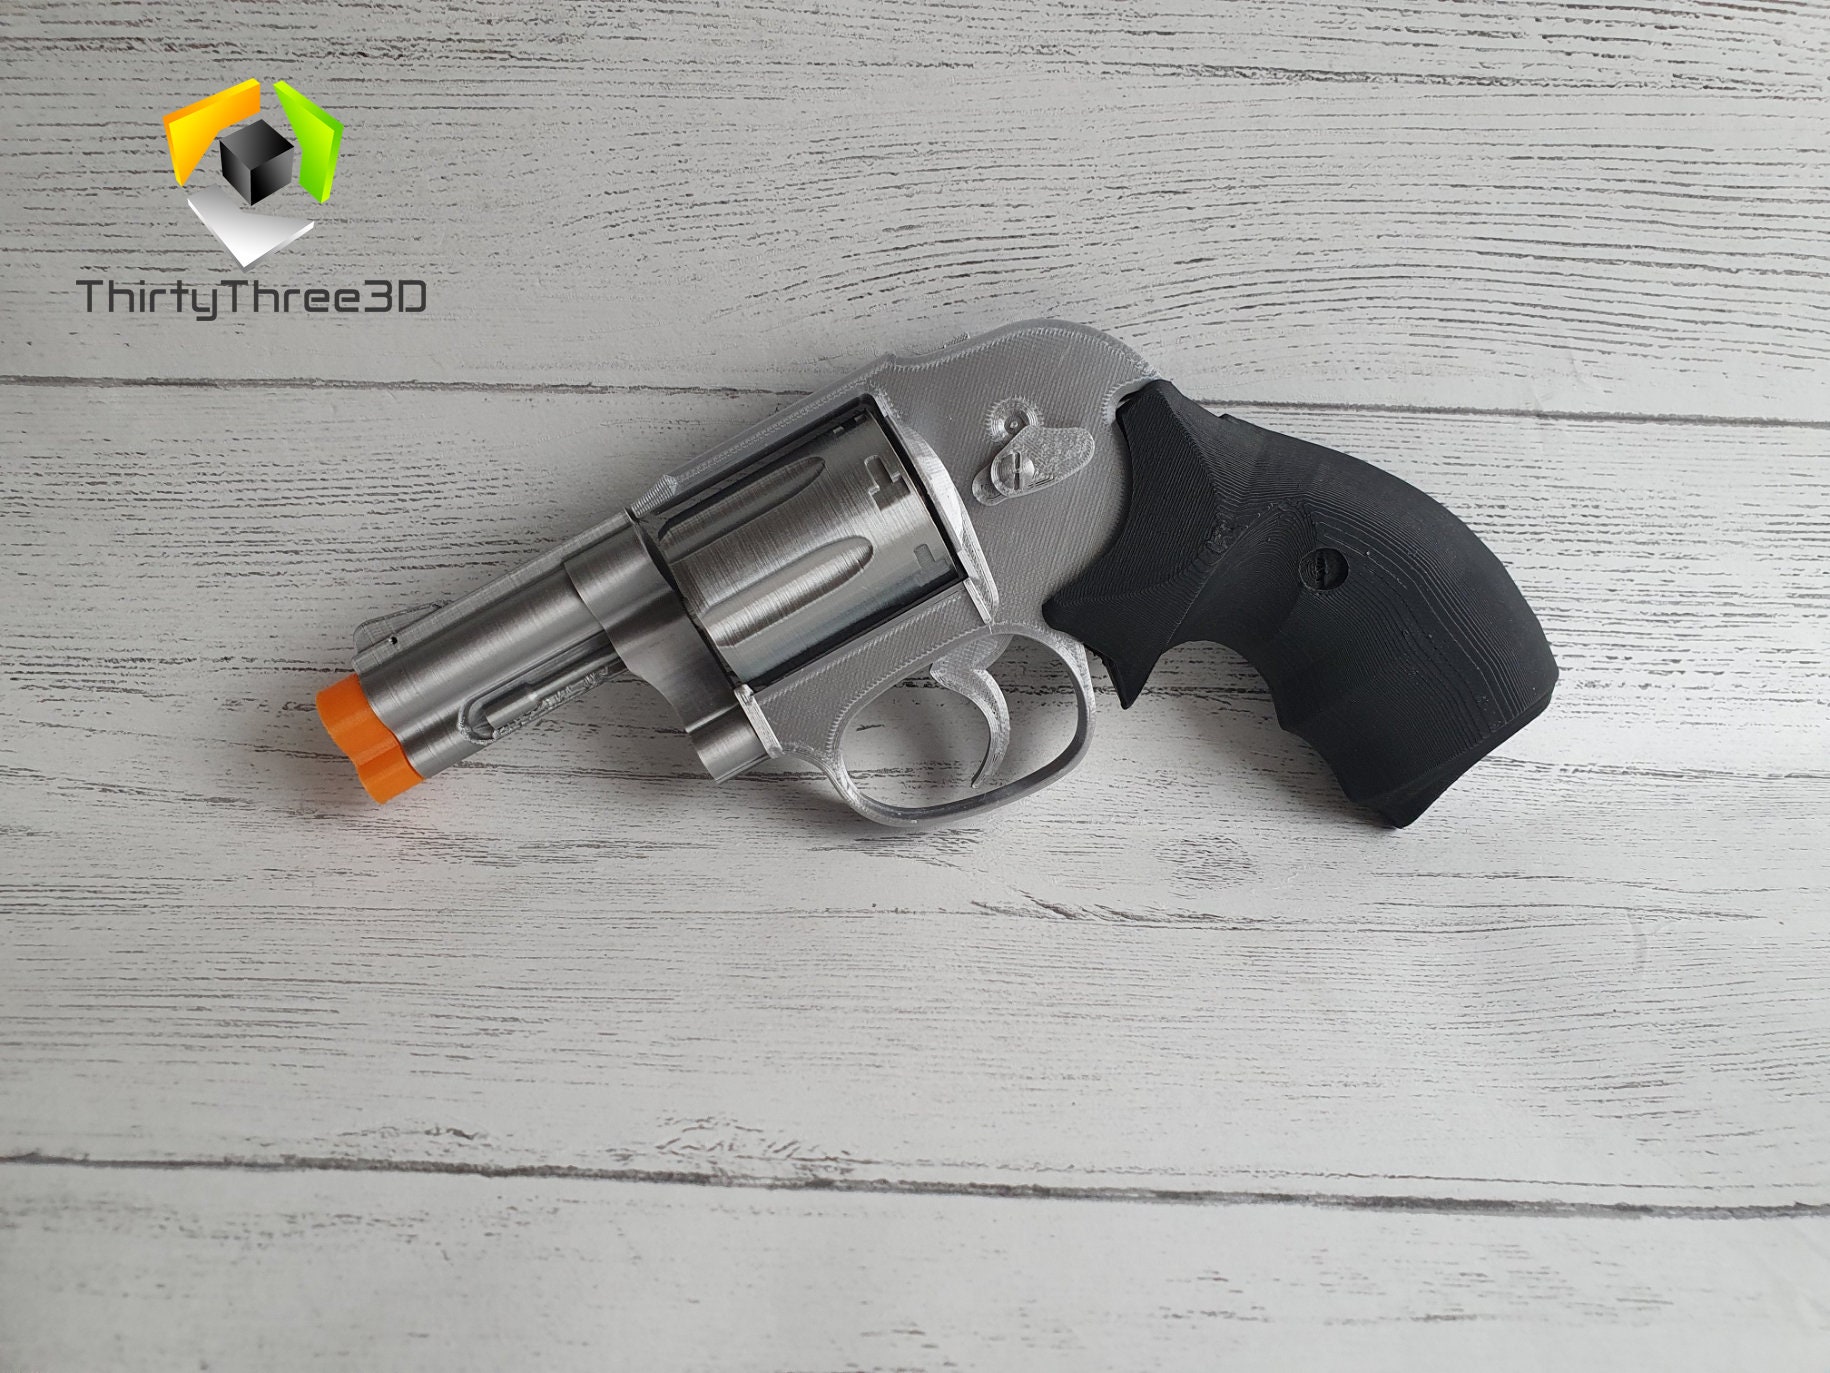 REVOLVER PACK HDR50 - 11 Joules + 2 BARRELS + BALLS + 10 CO2 CAPSULES +  CASE - Wicked Store